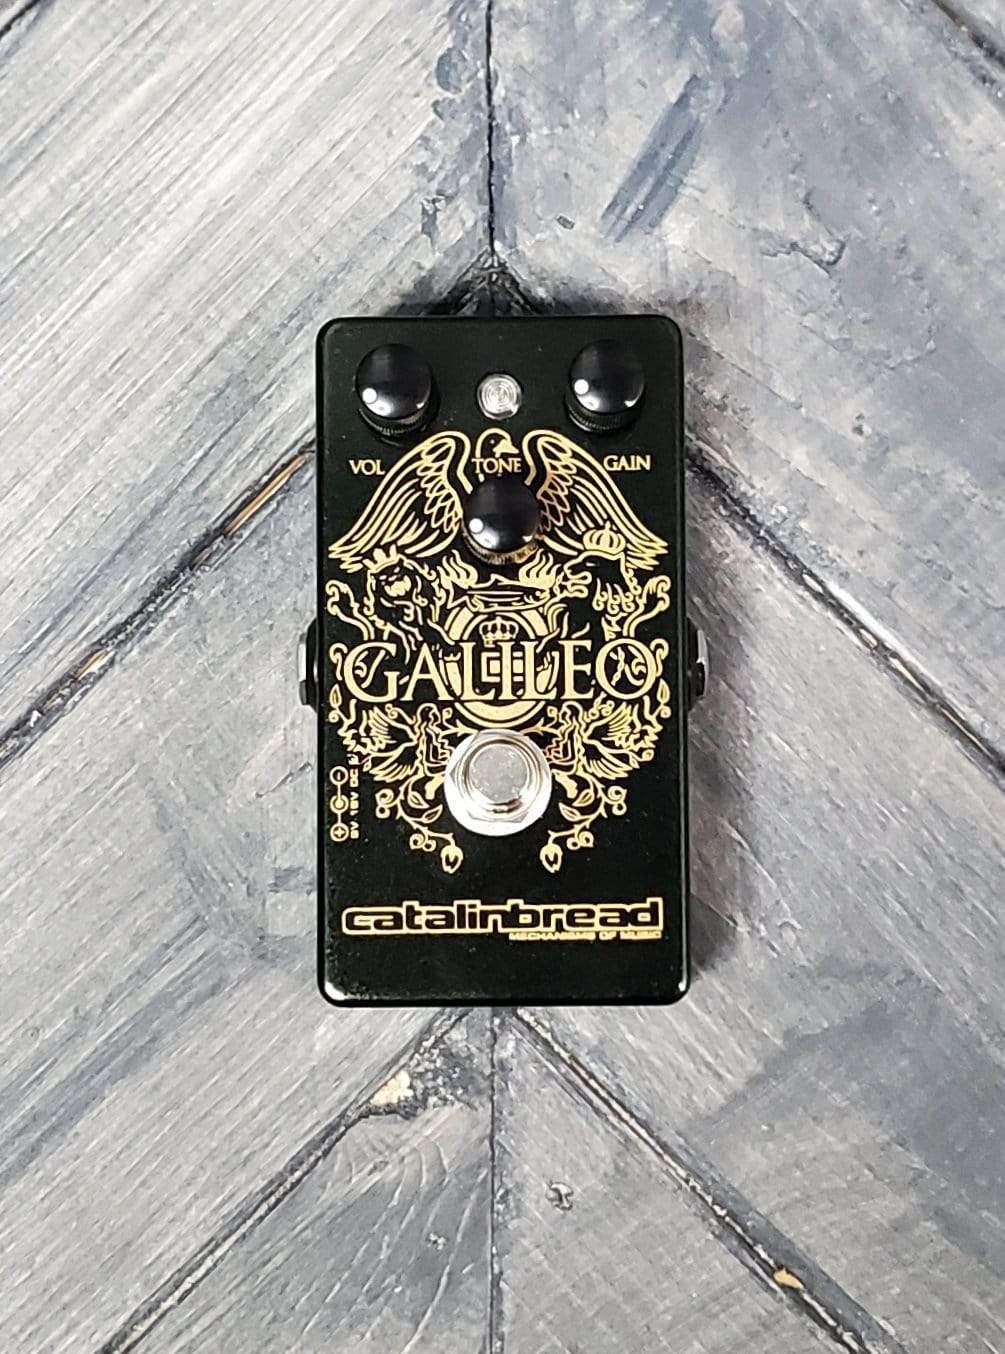 Catalinbread Galileo top of pedal with controls